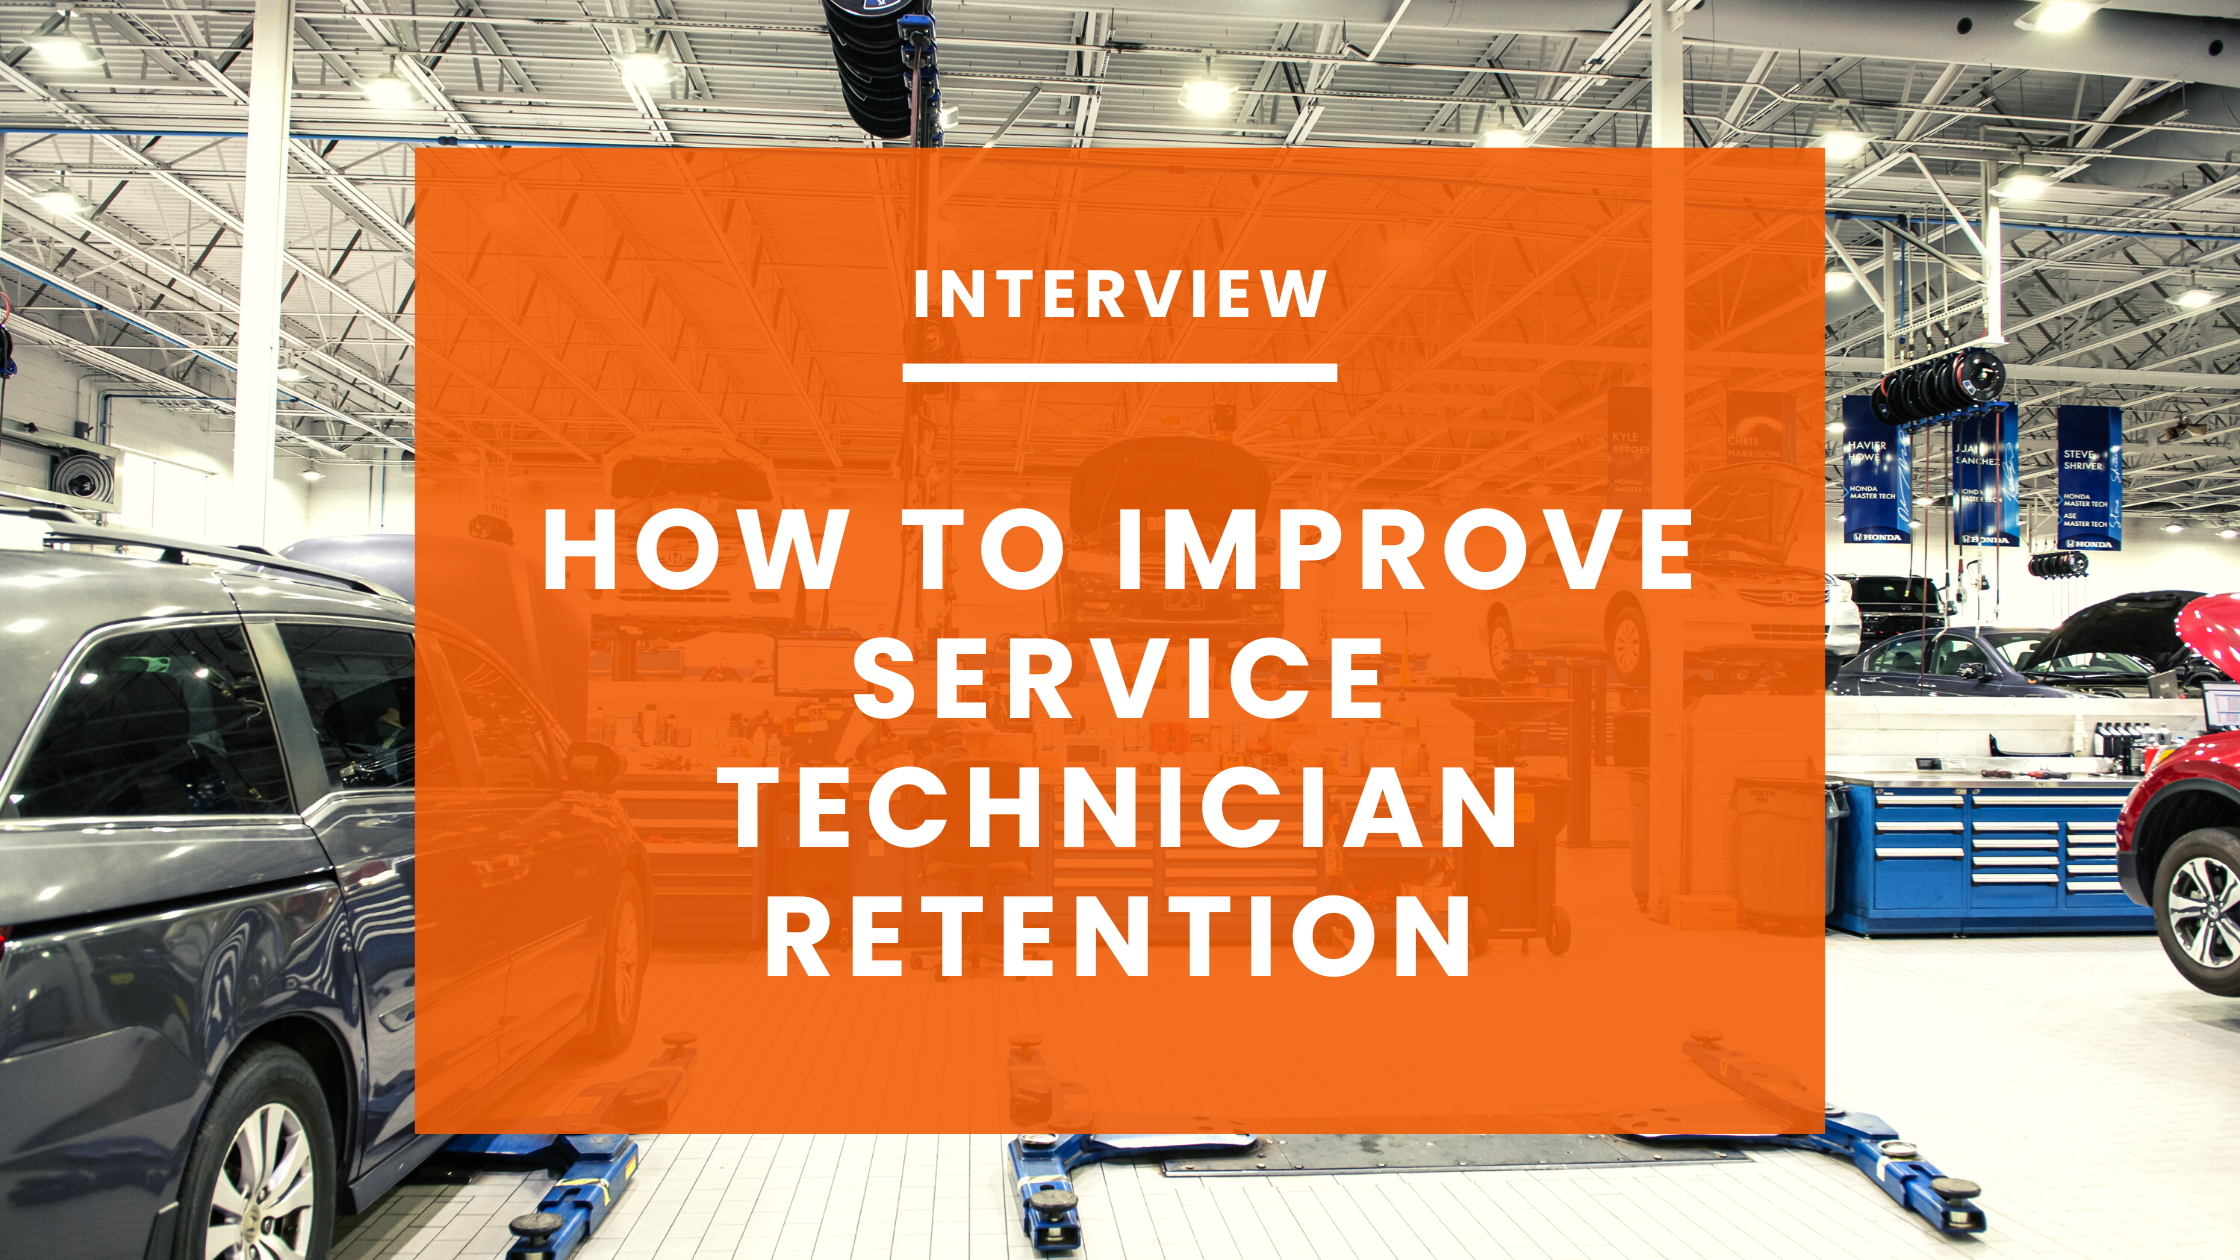 Interview: How to Improve Service Technician Retention